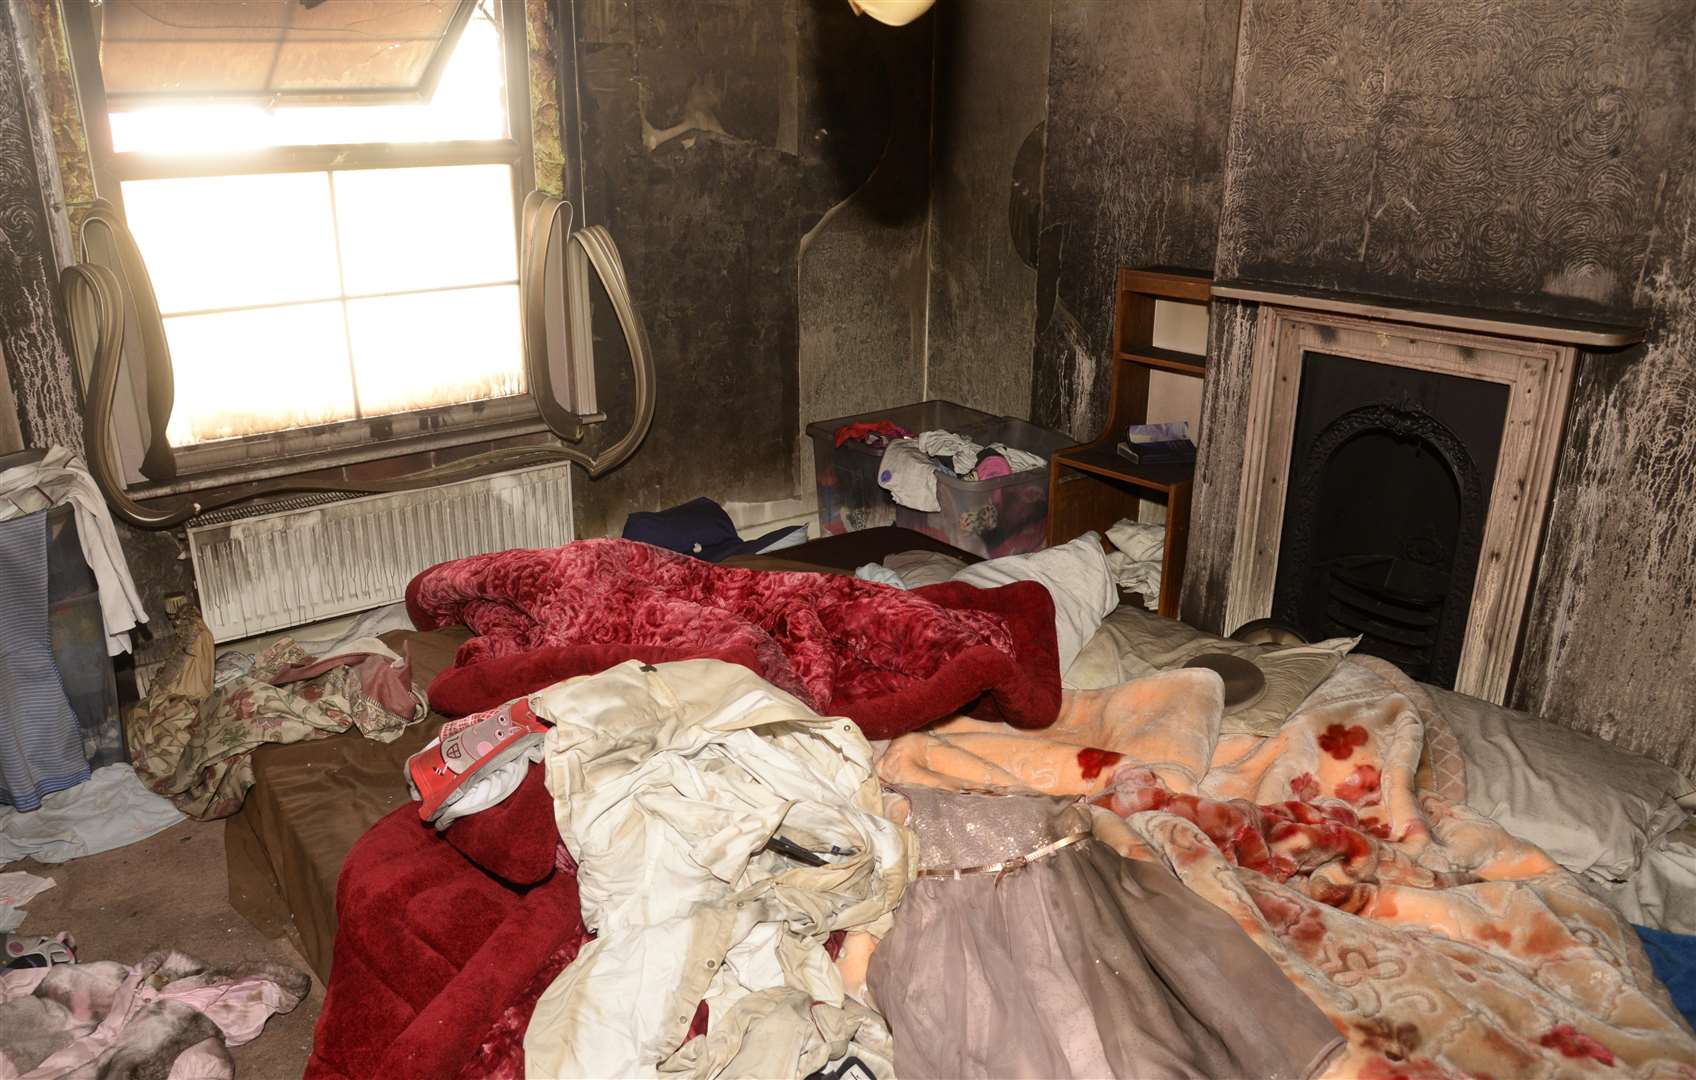 The family's clothing and bedding was all either destroyed or contaminated by smoke.